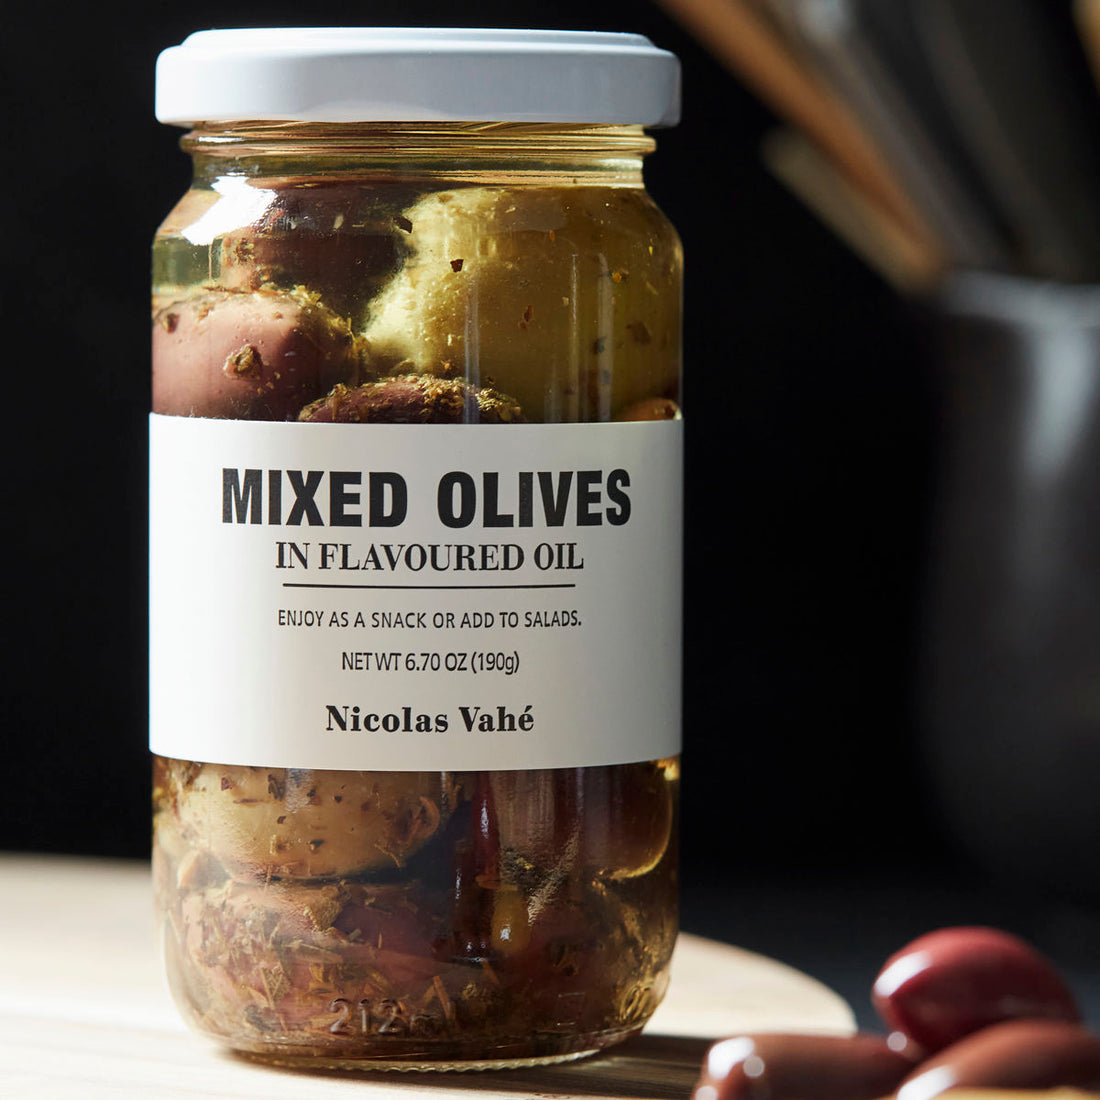 Nikolas Vahé - Mixed Olives, in flavoured oil